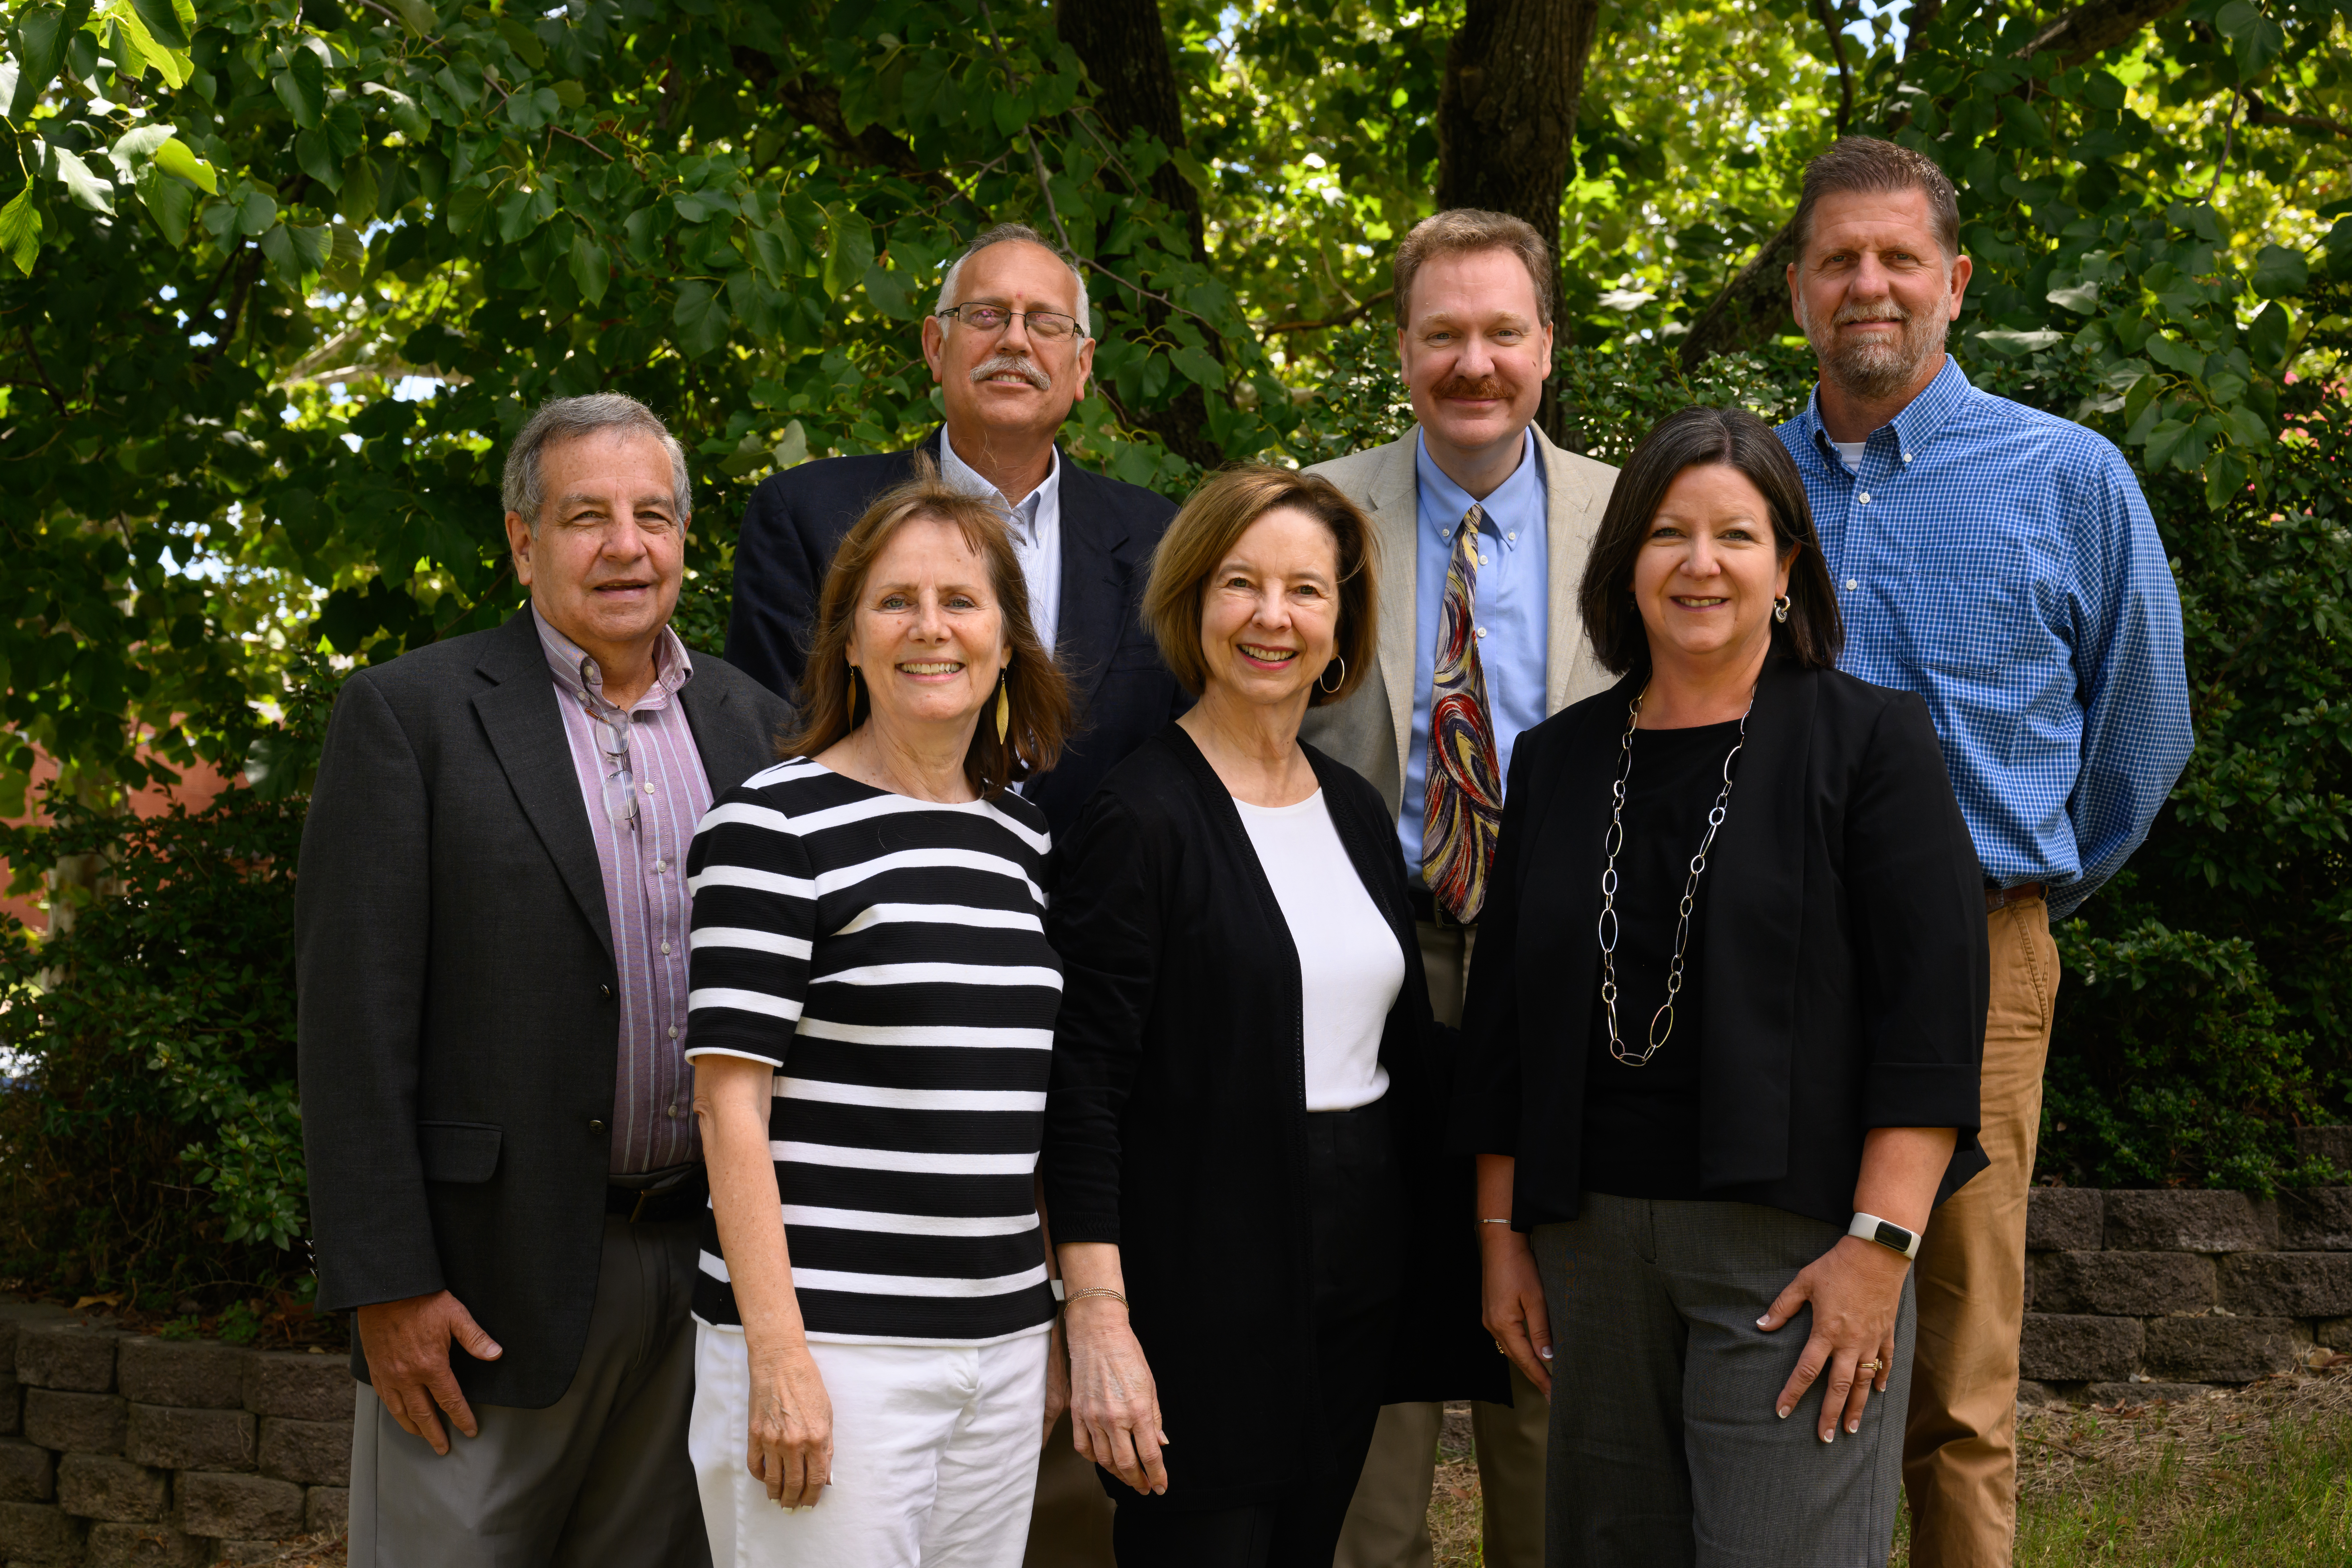 Group photo of Faculty Leadership Council members 2020-2021